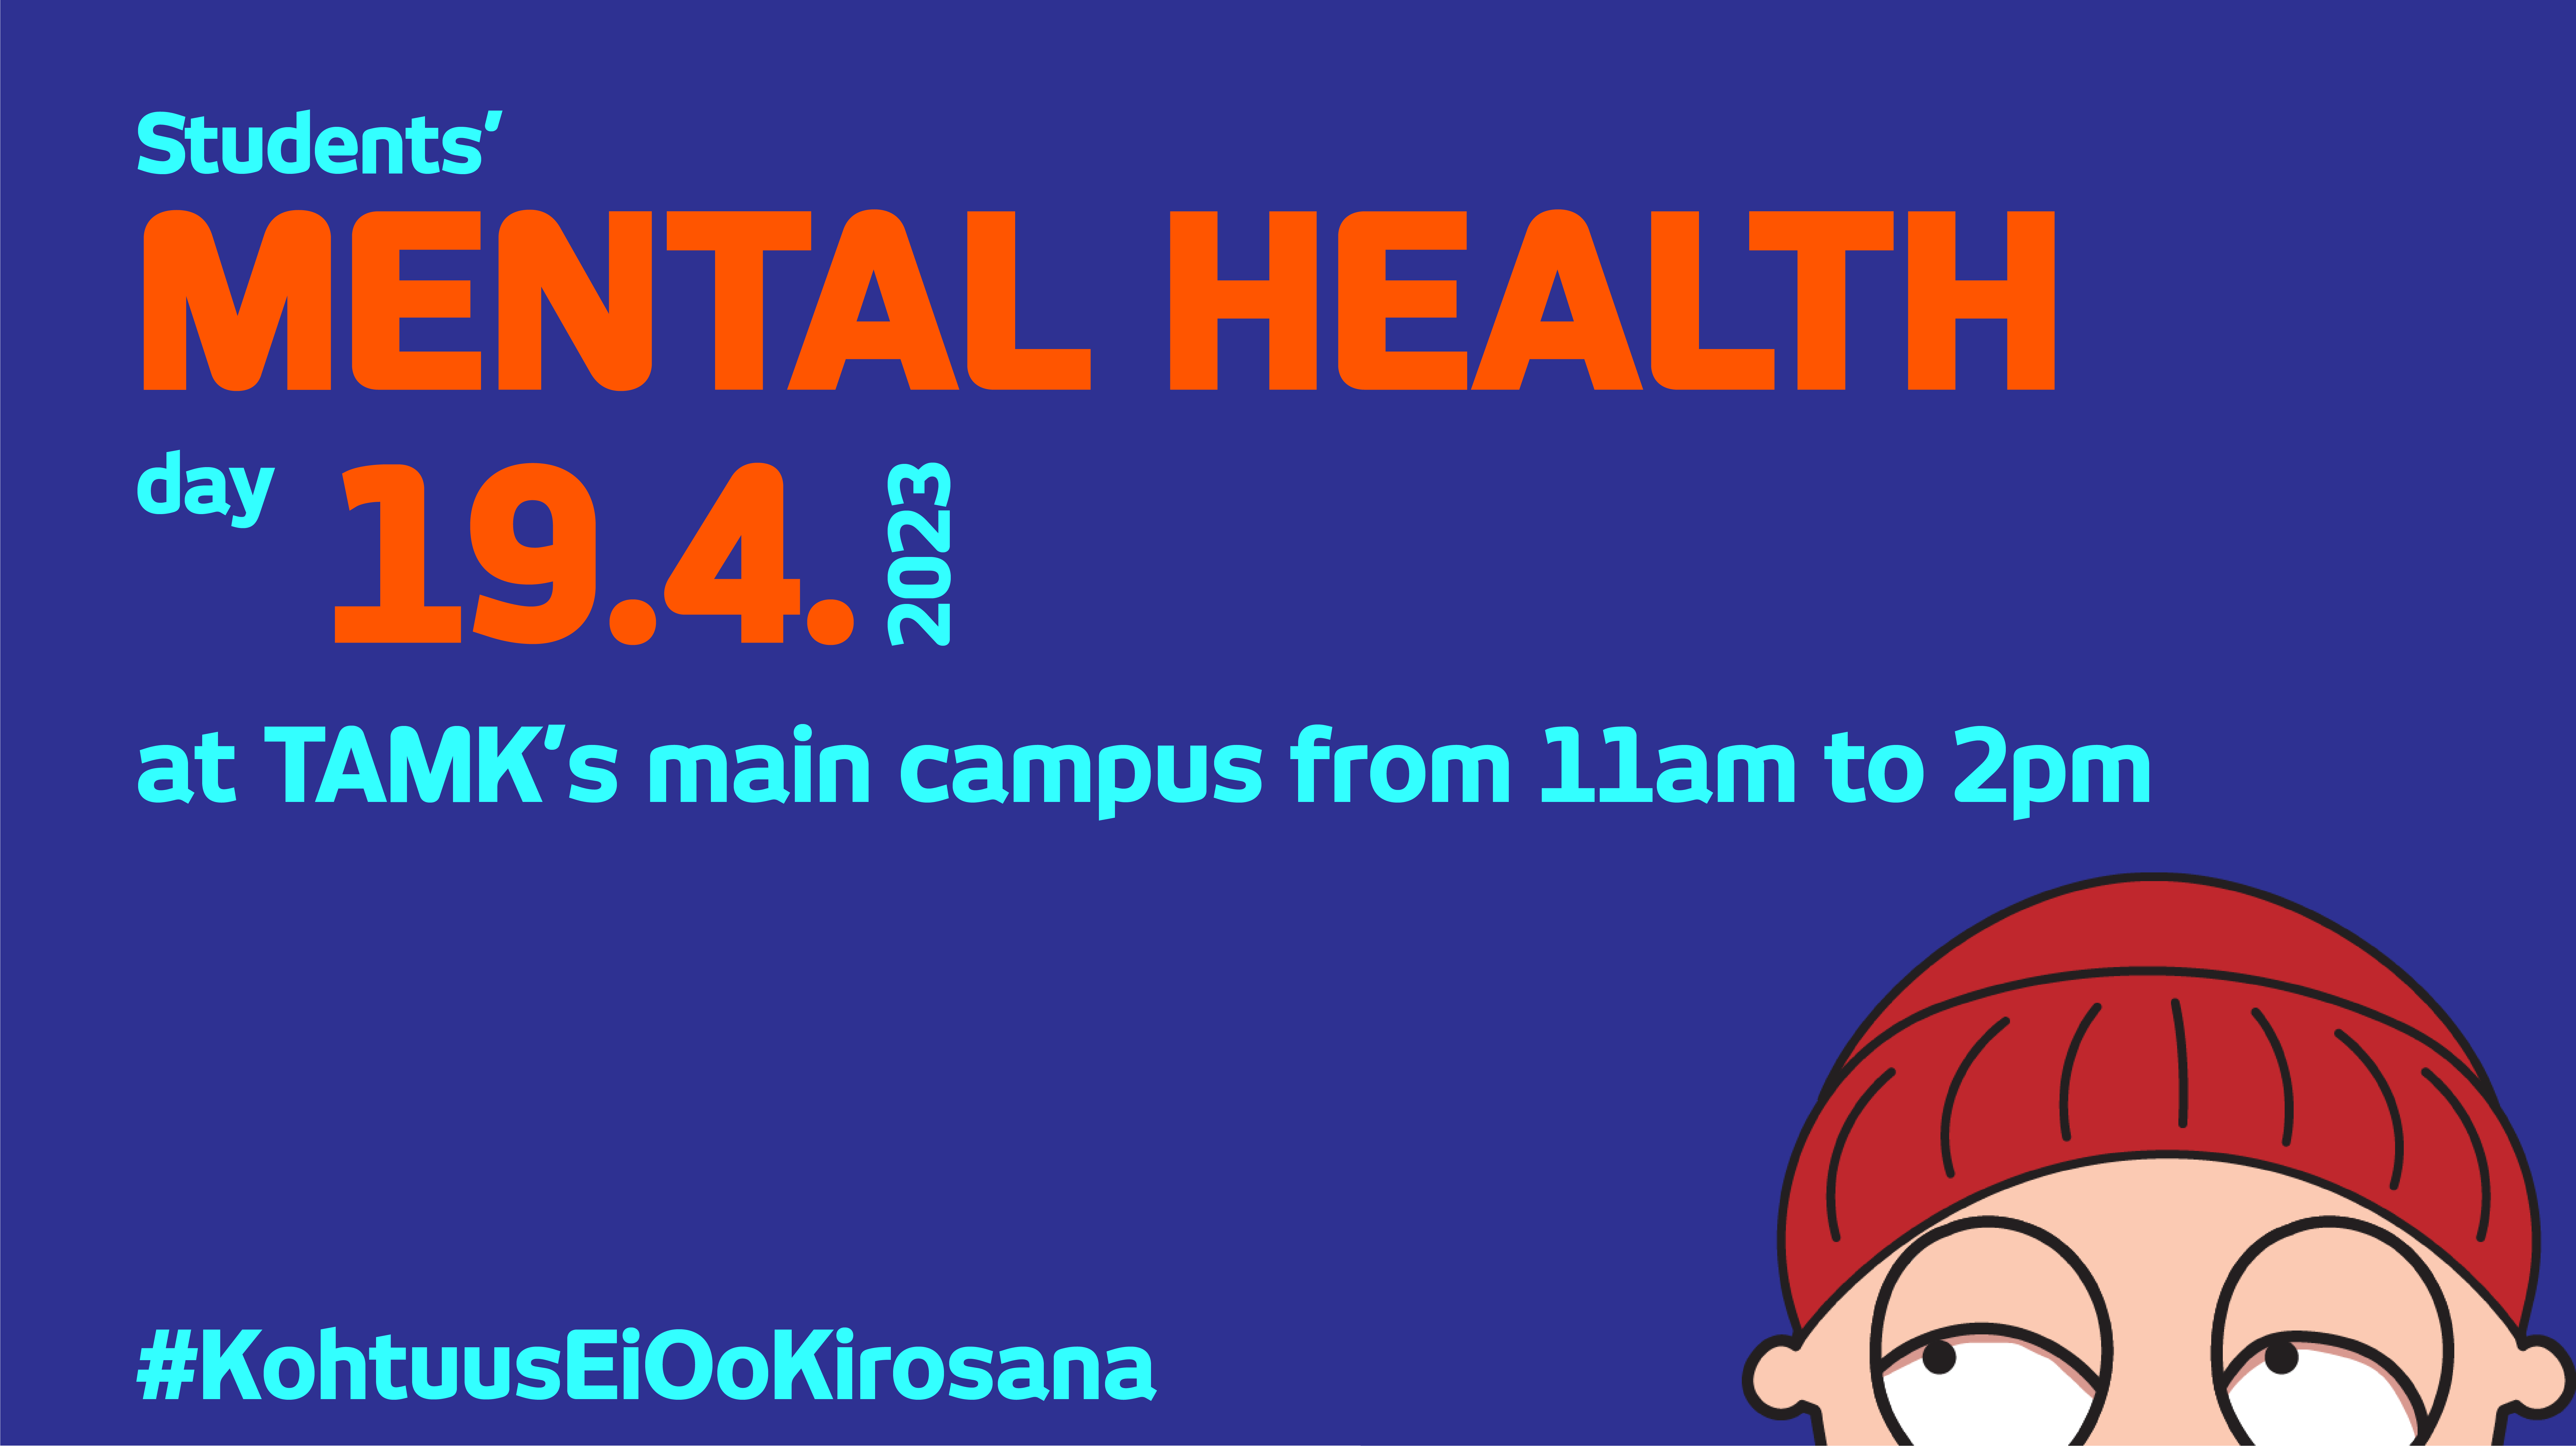 Students’ Mental Health Day event 19.4.